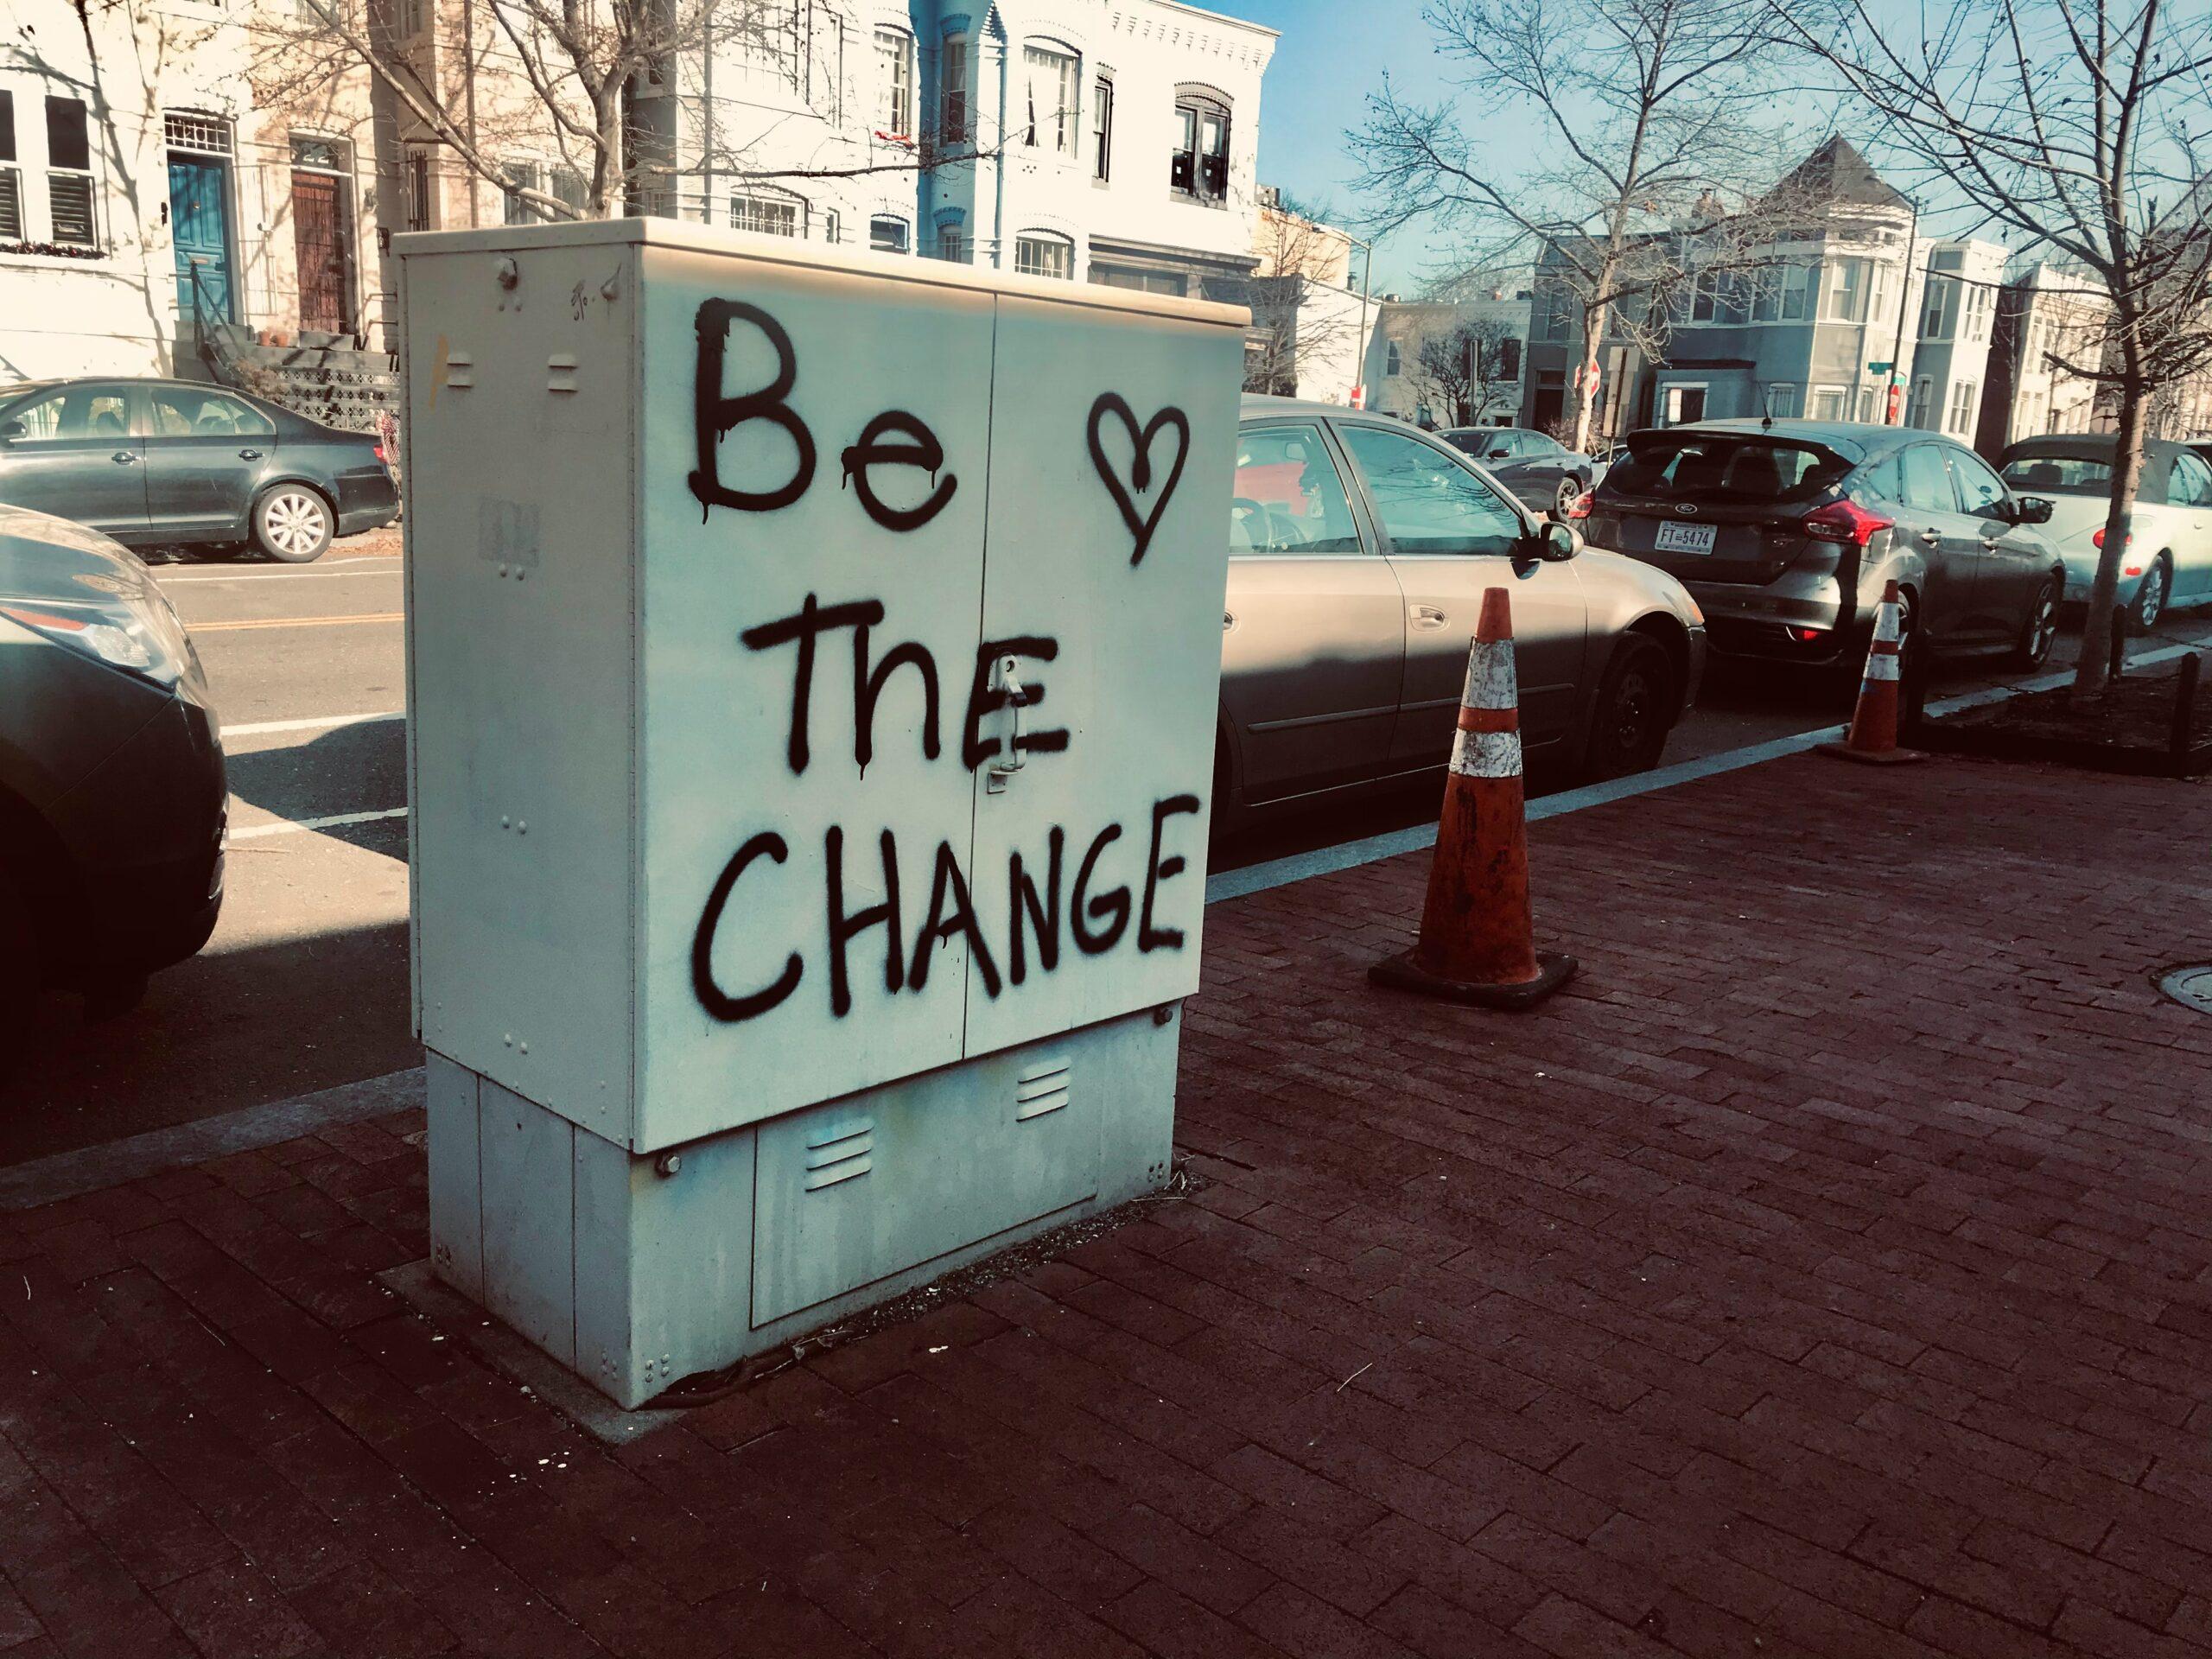 “Be The Change”